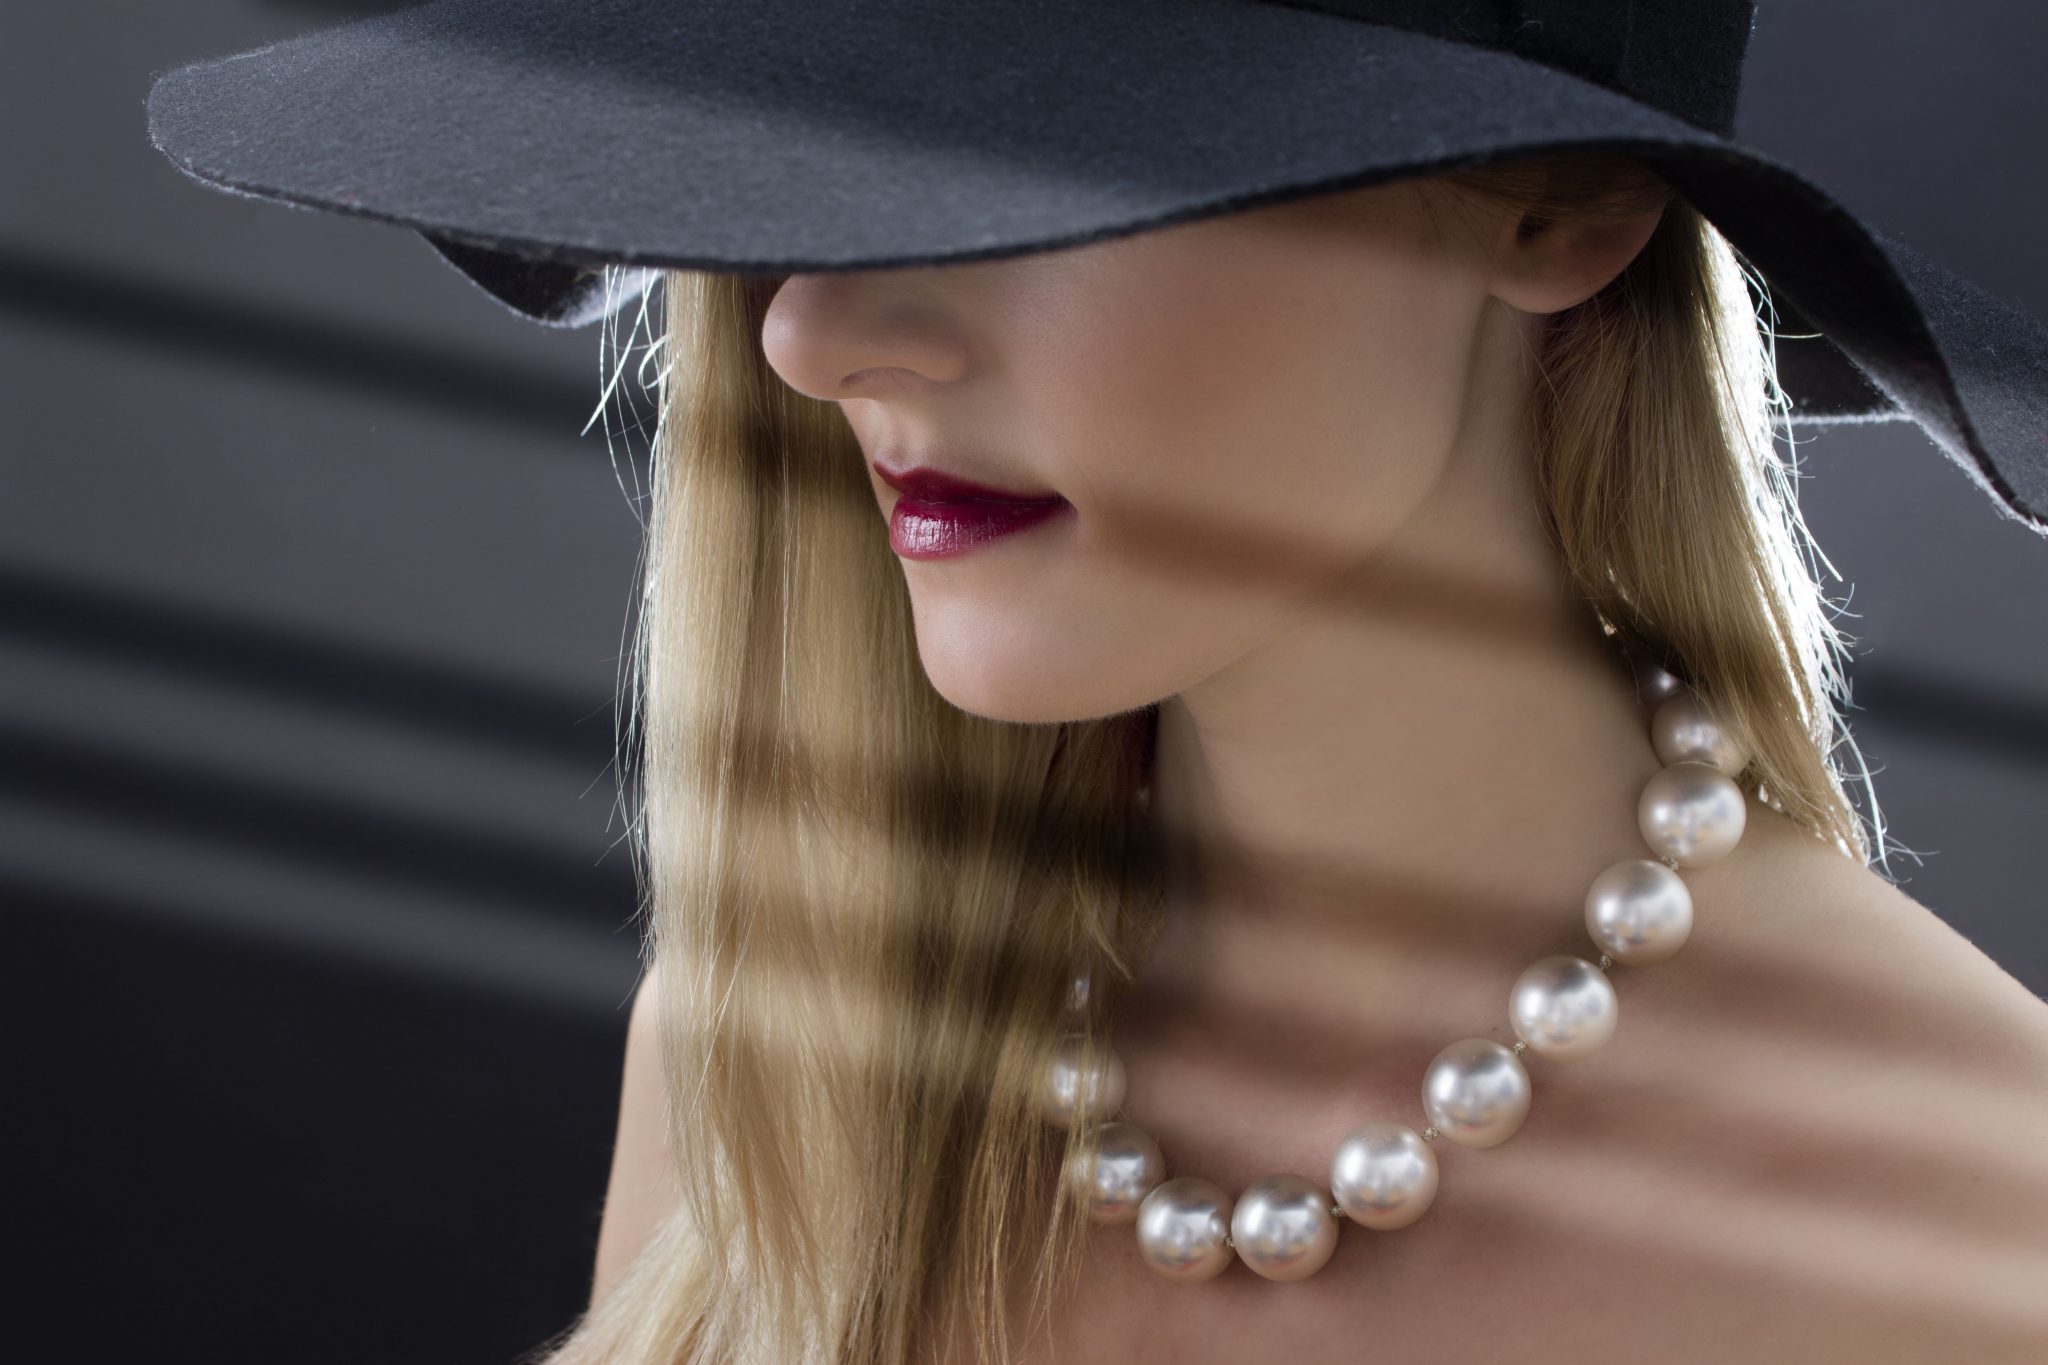 Top Five Ways to Wear Pearls